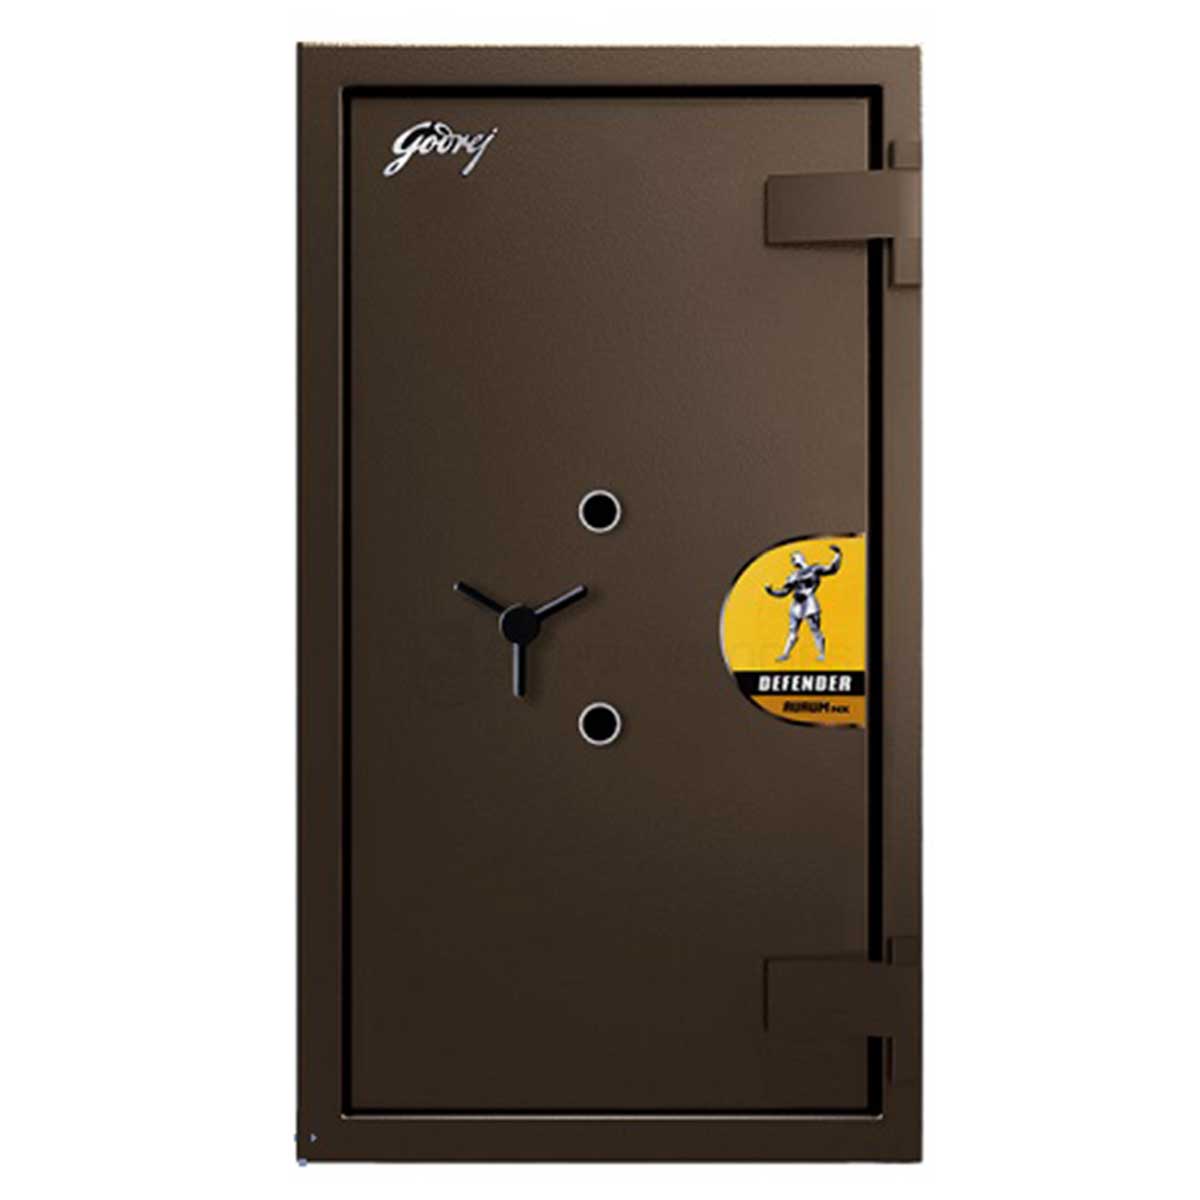 Godrej safety locker Manufacturers, Suppliers in Greater Kailash